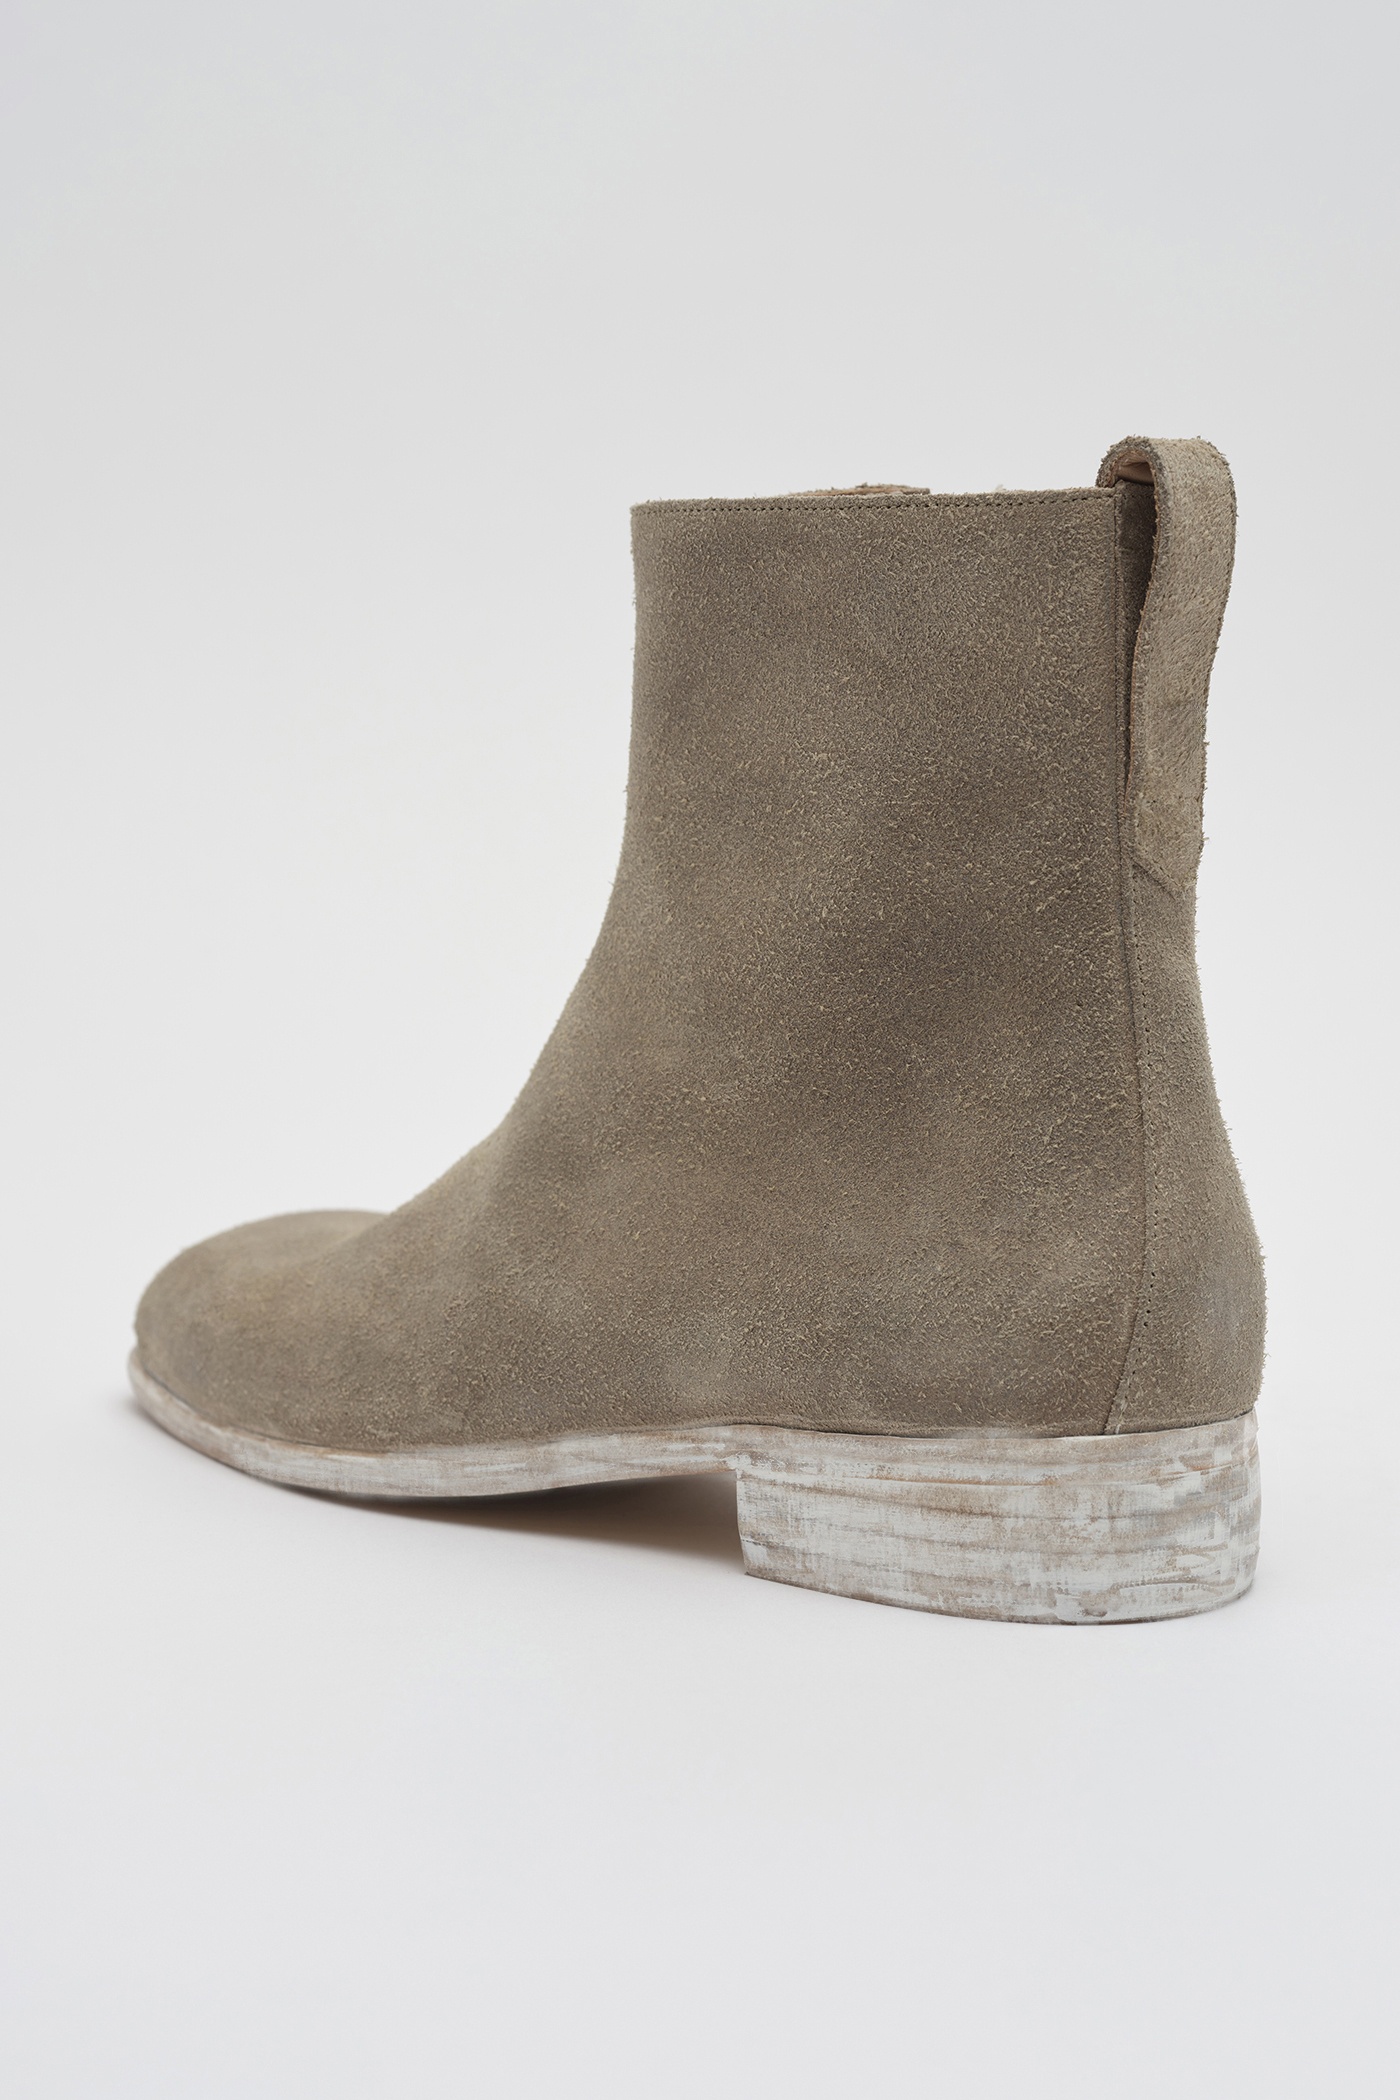 Michaelis Boot Waxy Champagne Suede - 3